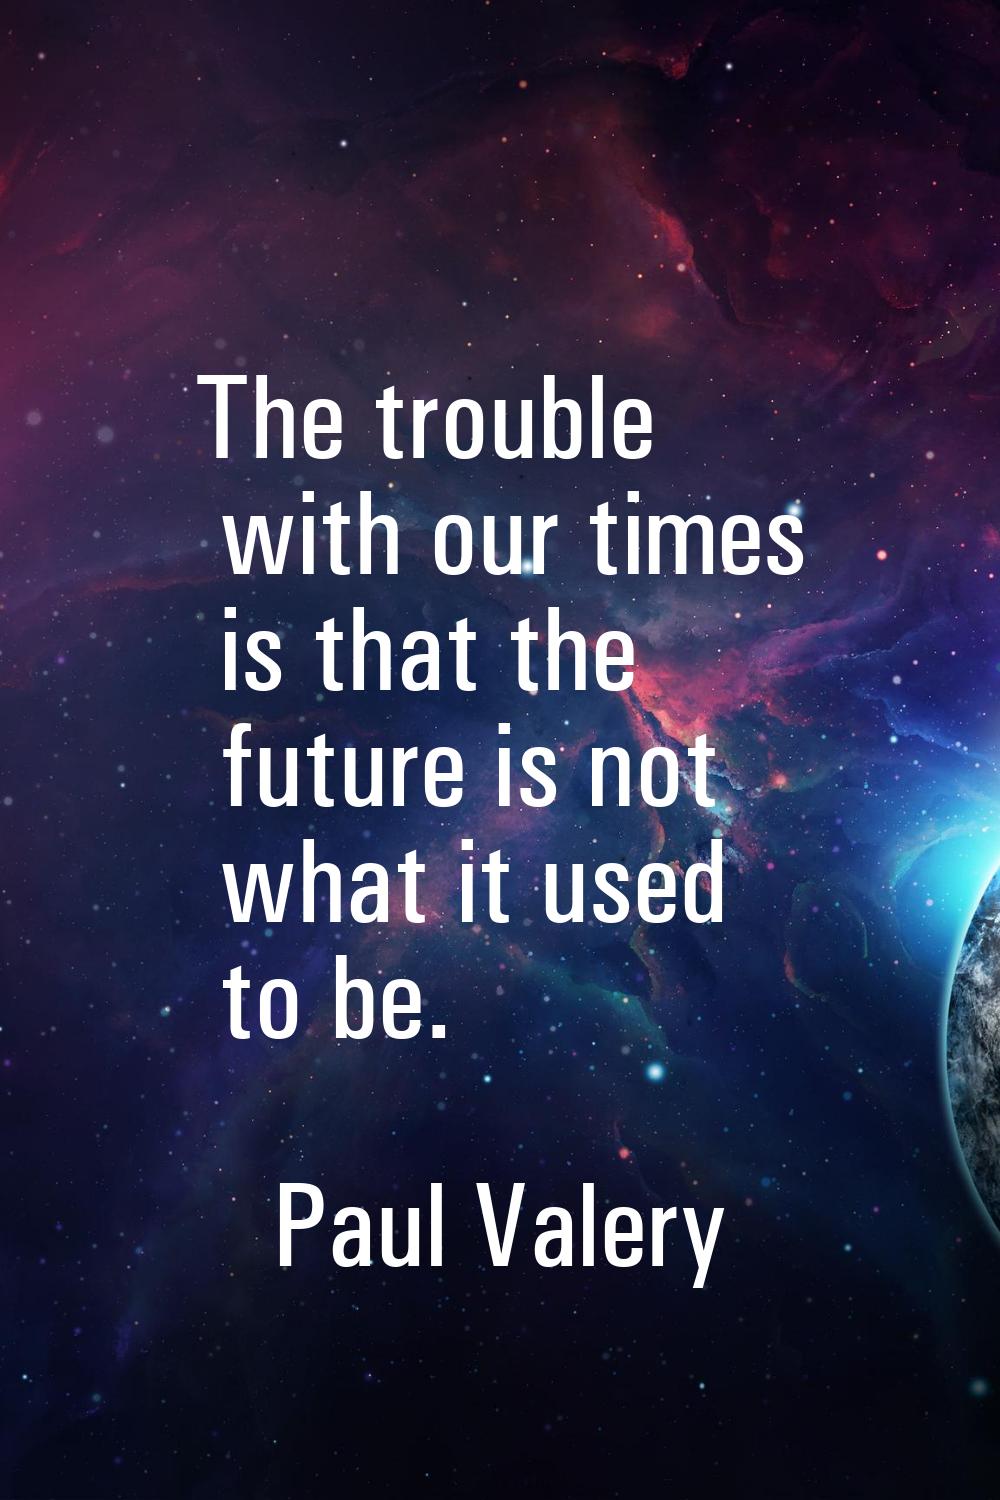 The trouble with our times is that the future is not what it used to be.